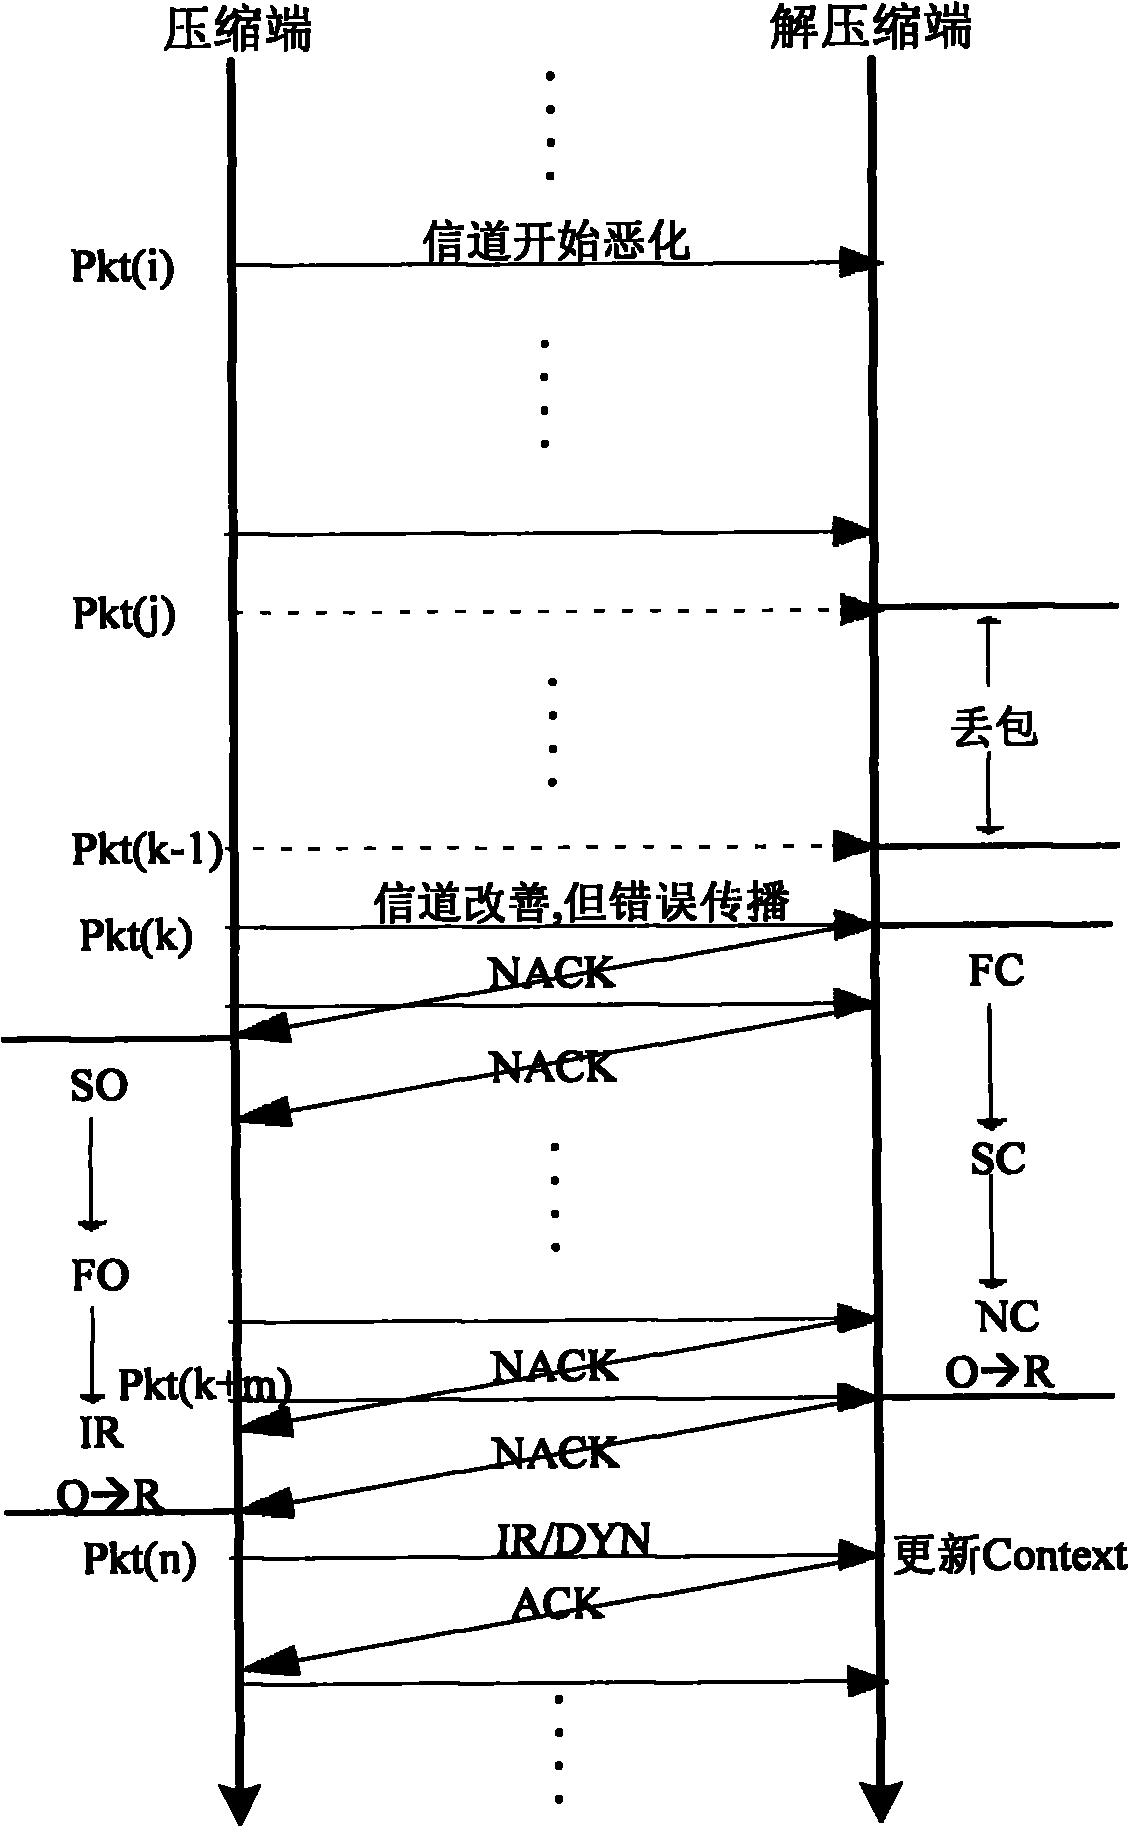 Method and equipment for improving performance of PDCP (Packet Data Convergence Protocol) ROHC (Robust Header Compression) algorithm